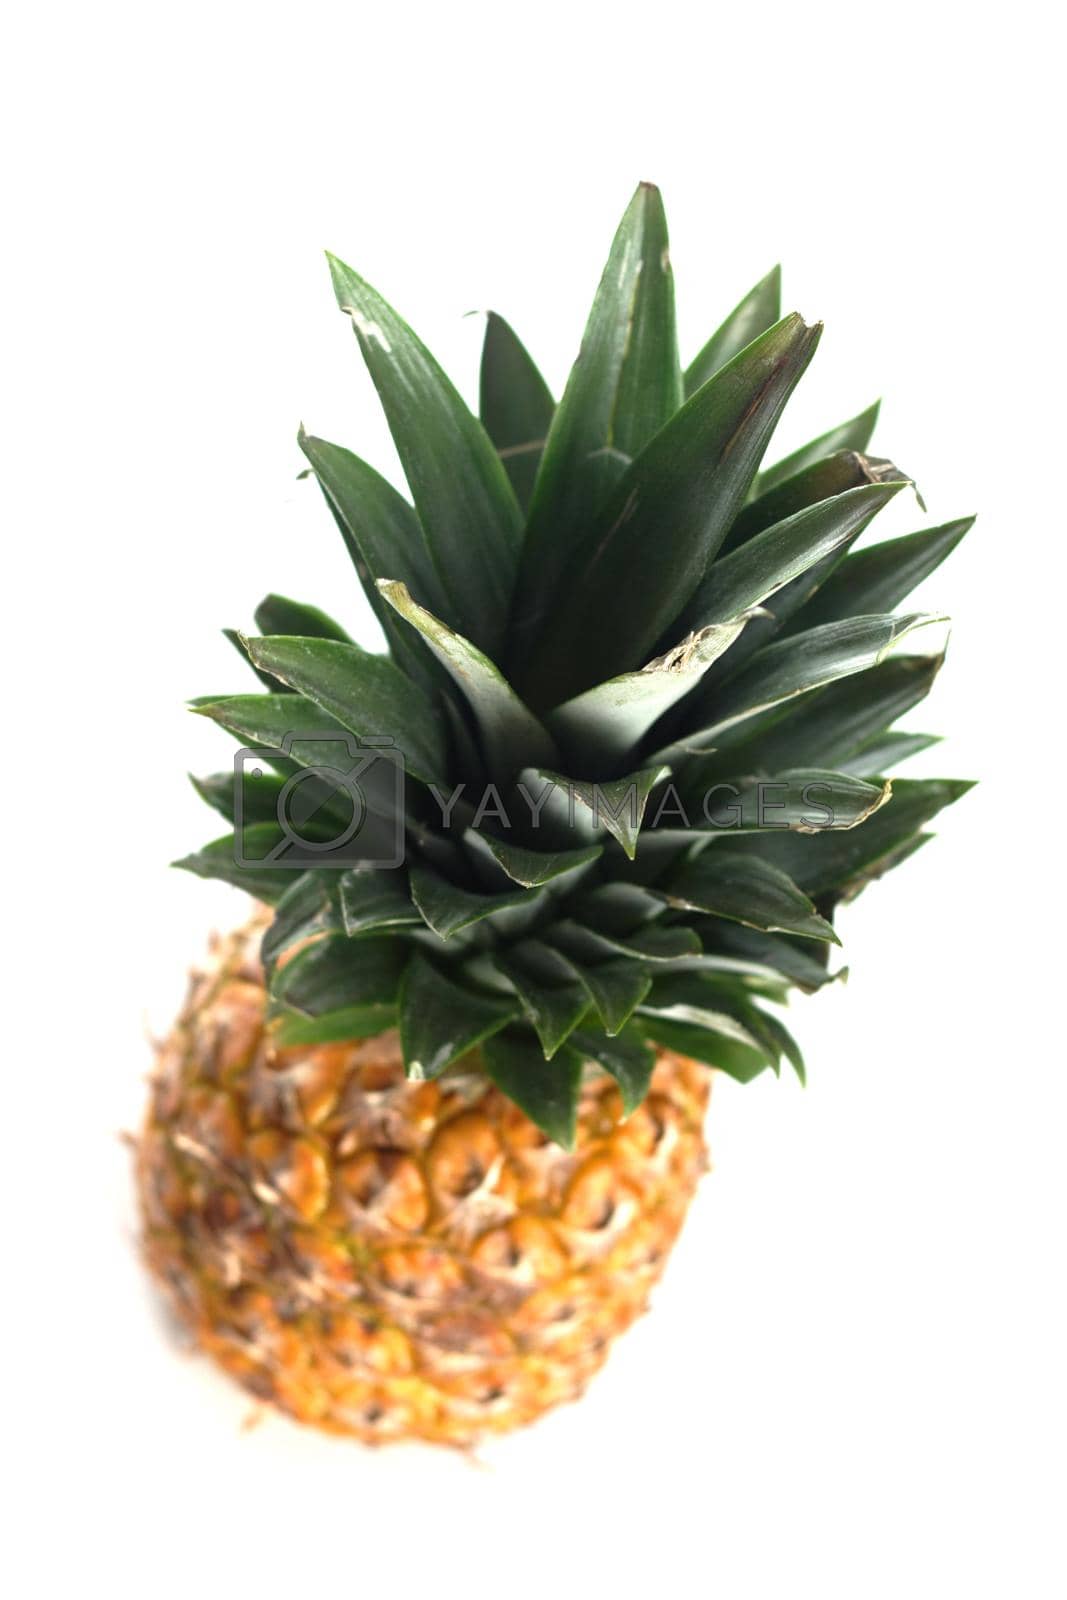 Royalty free image of Pineapple by moodboard